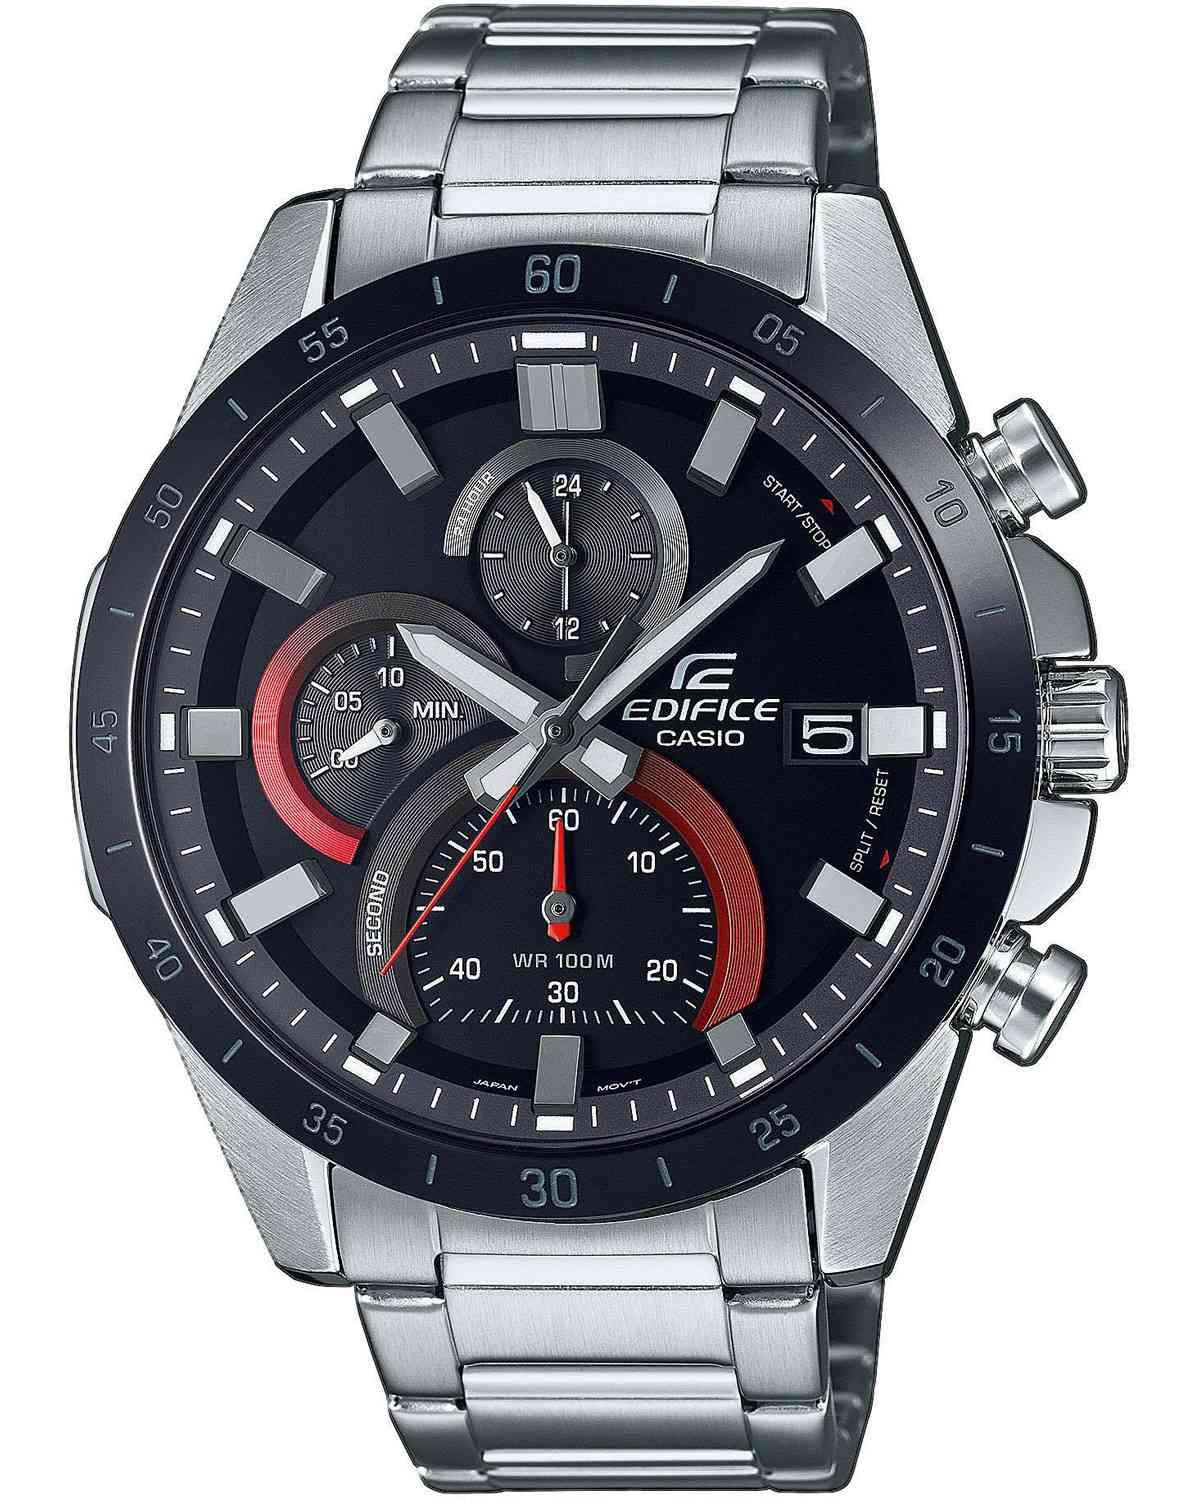 CASIO Edifice Chronograph - EFR-571DB-1A1VUEF, Silver case with Stainless Steel Bracelet